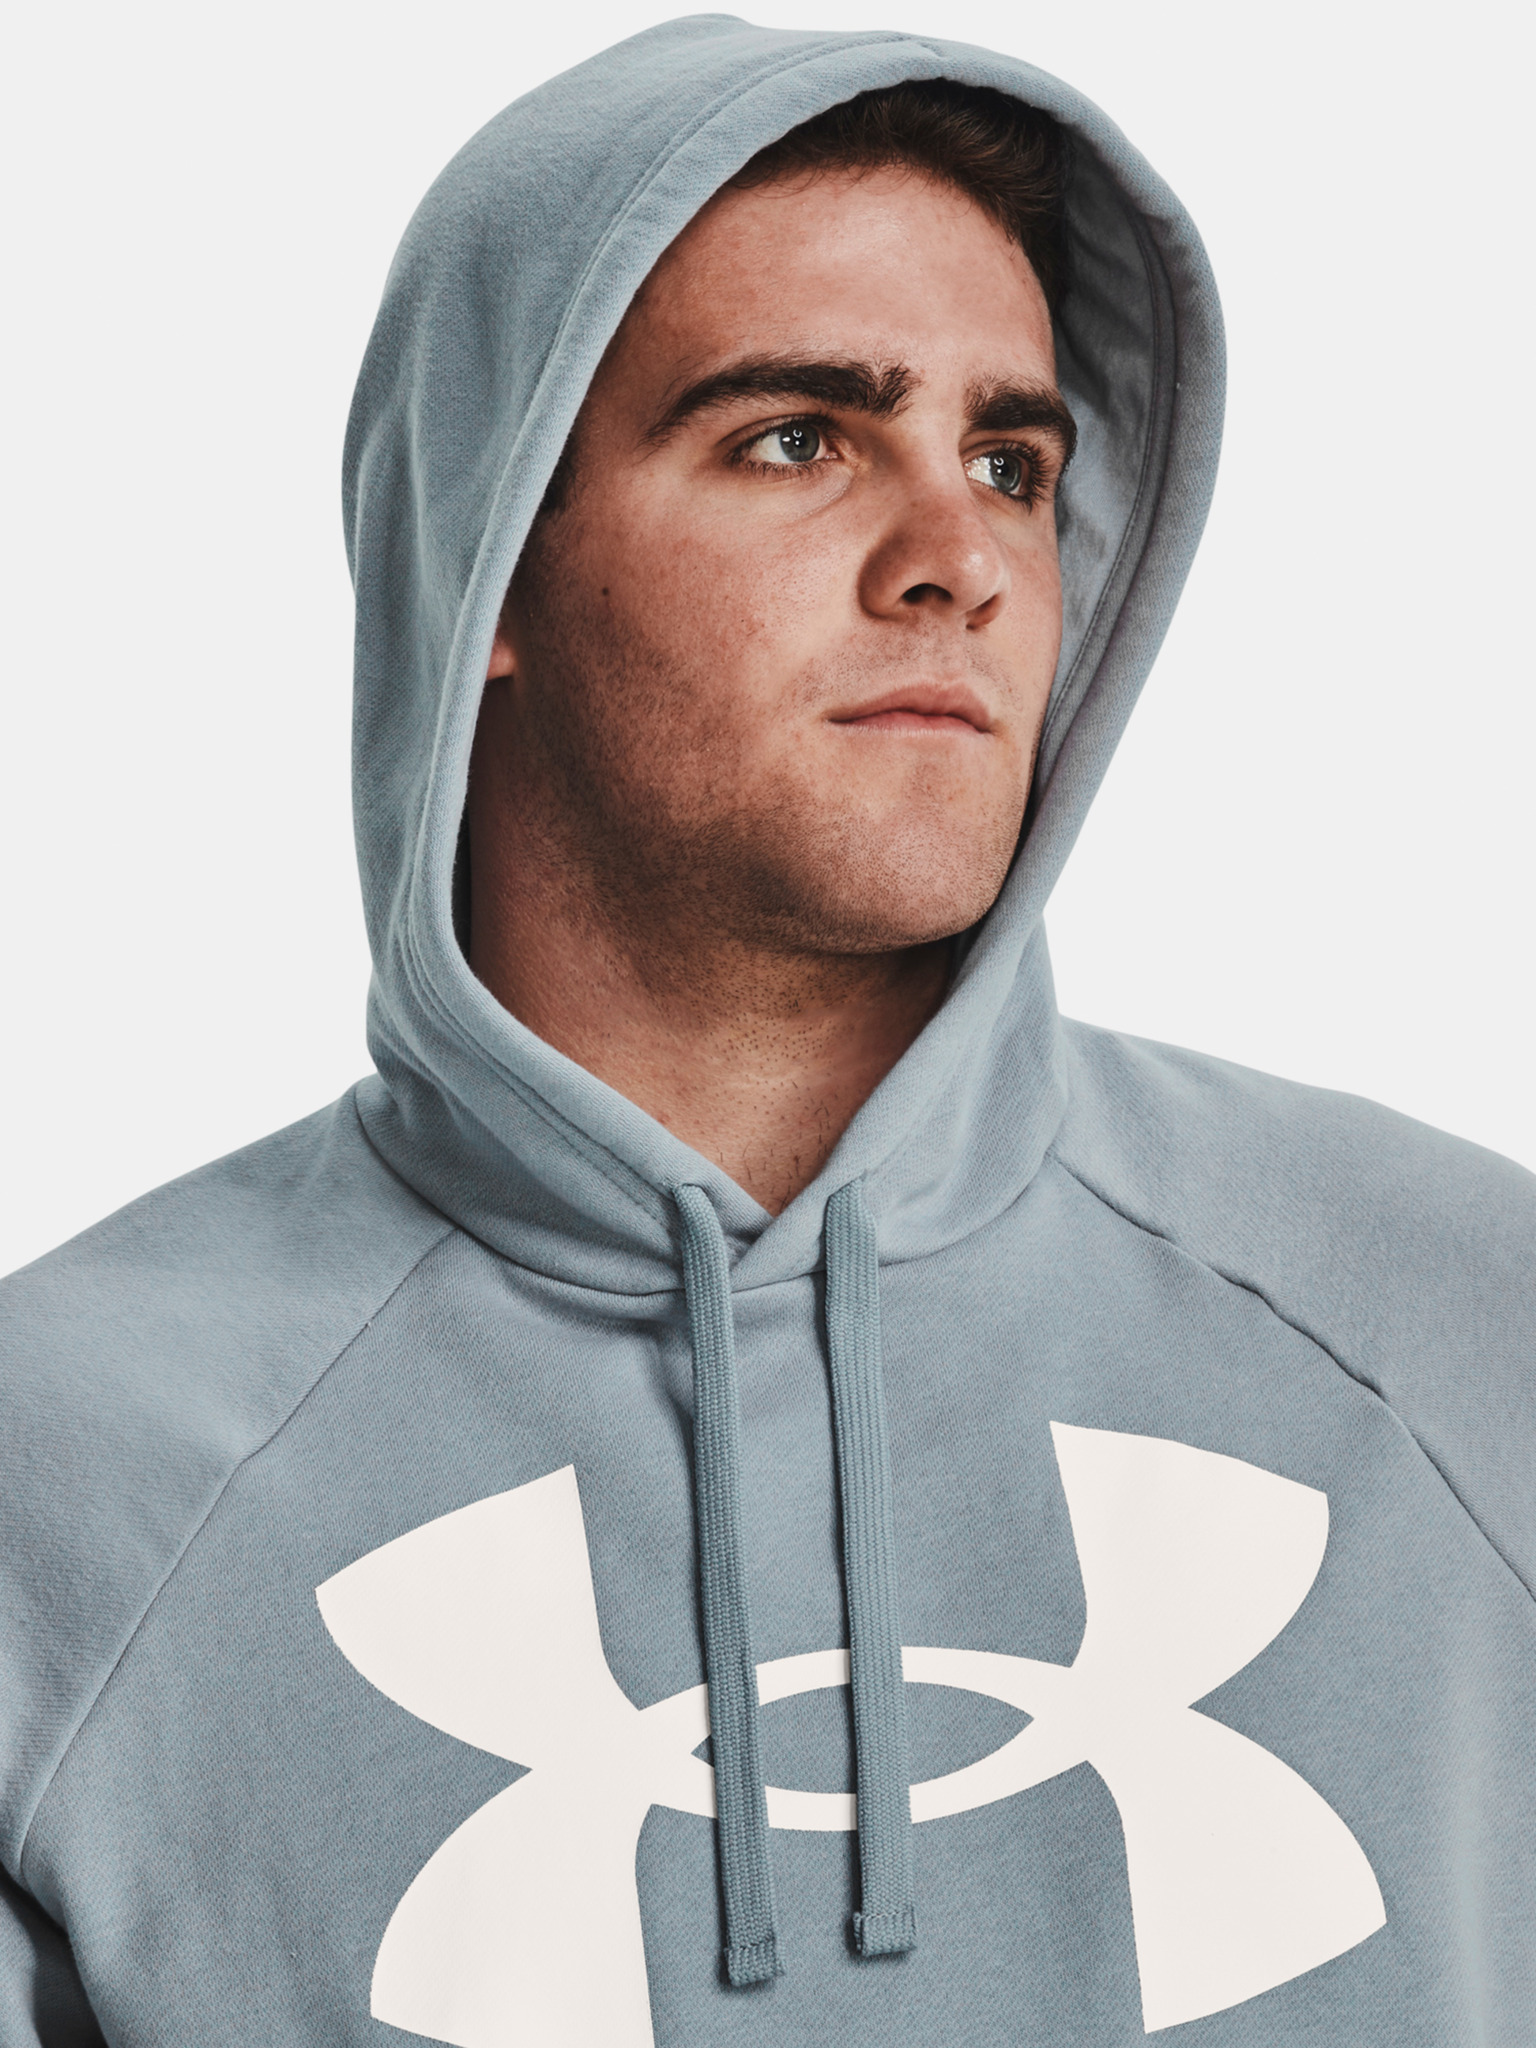 Under Armour - Rival Terry Novelty HD Sweatshirt